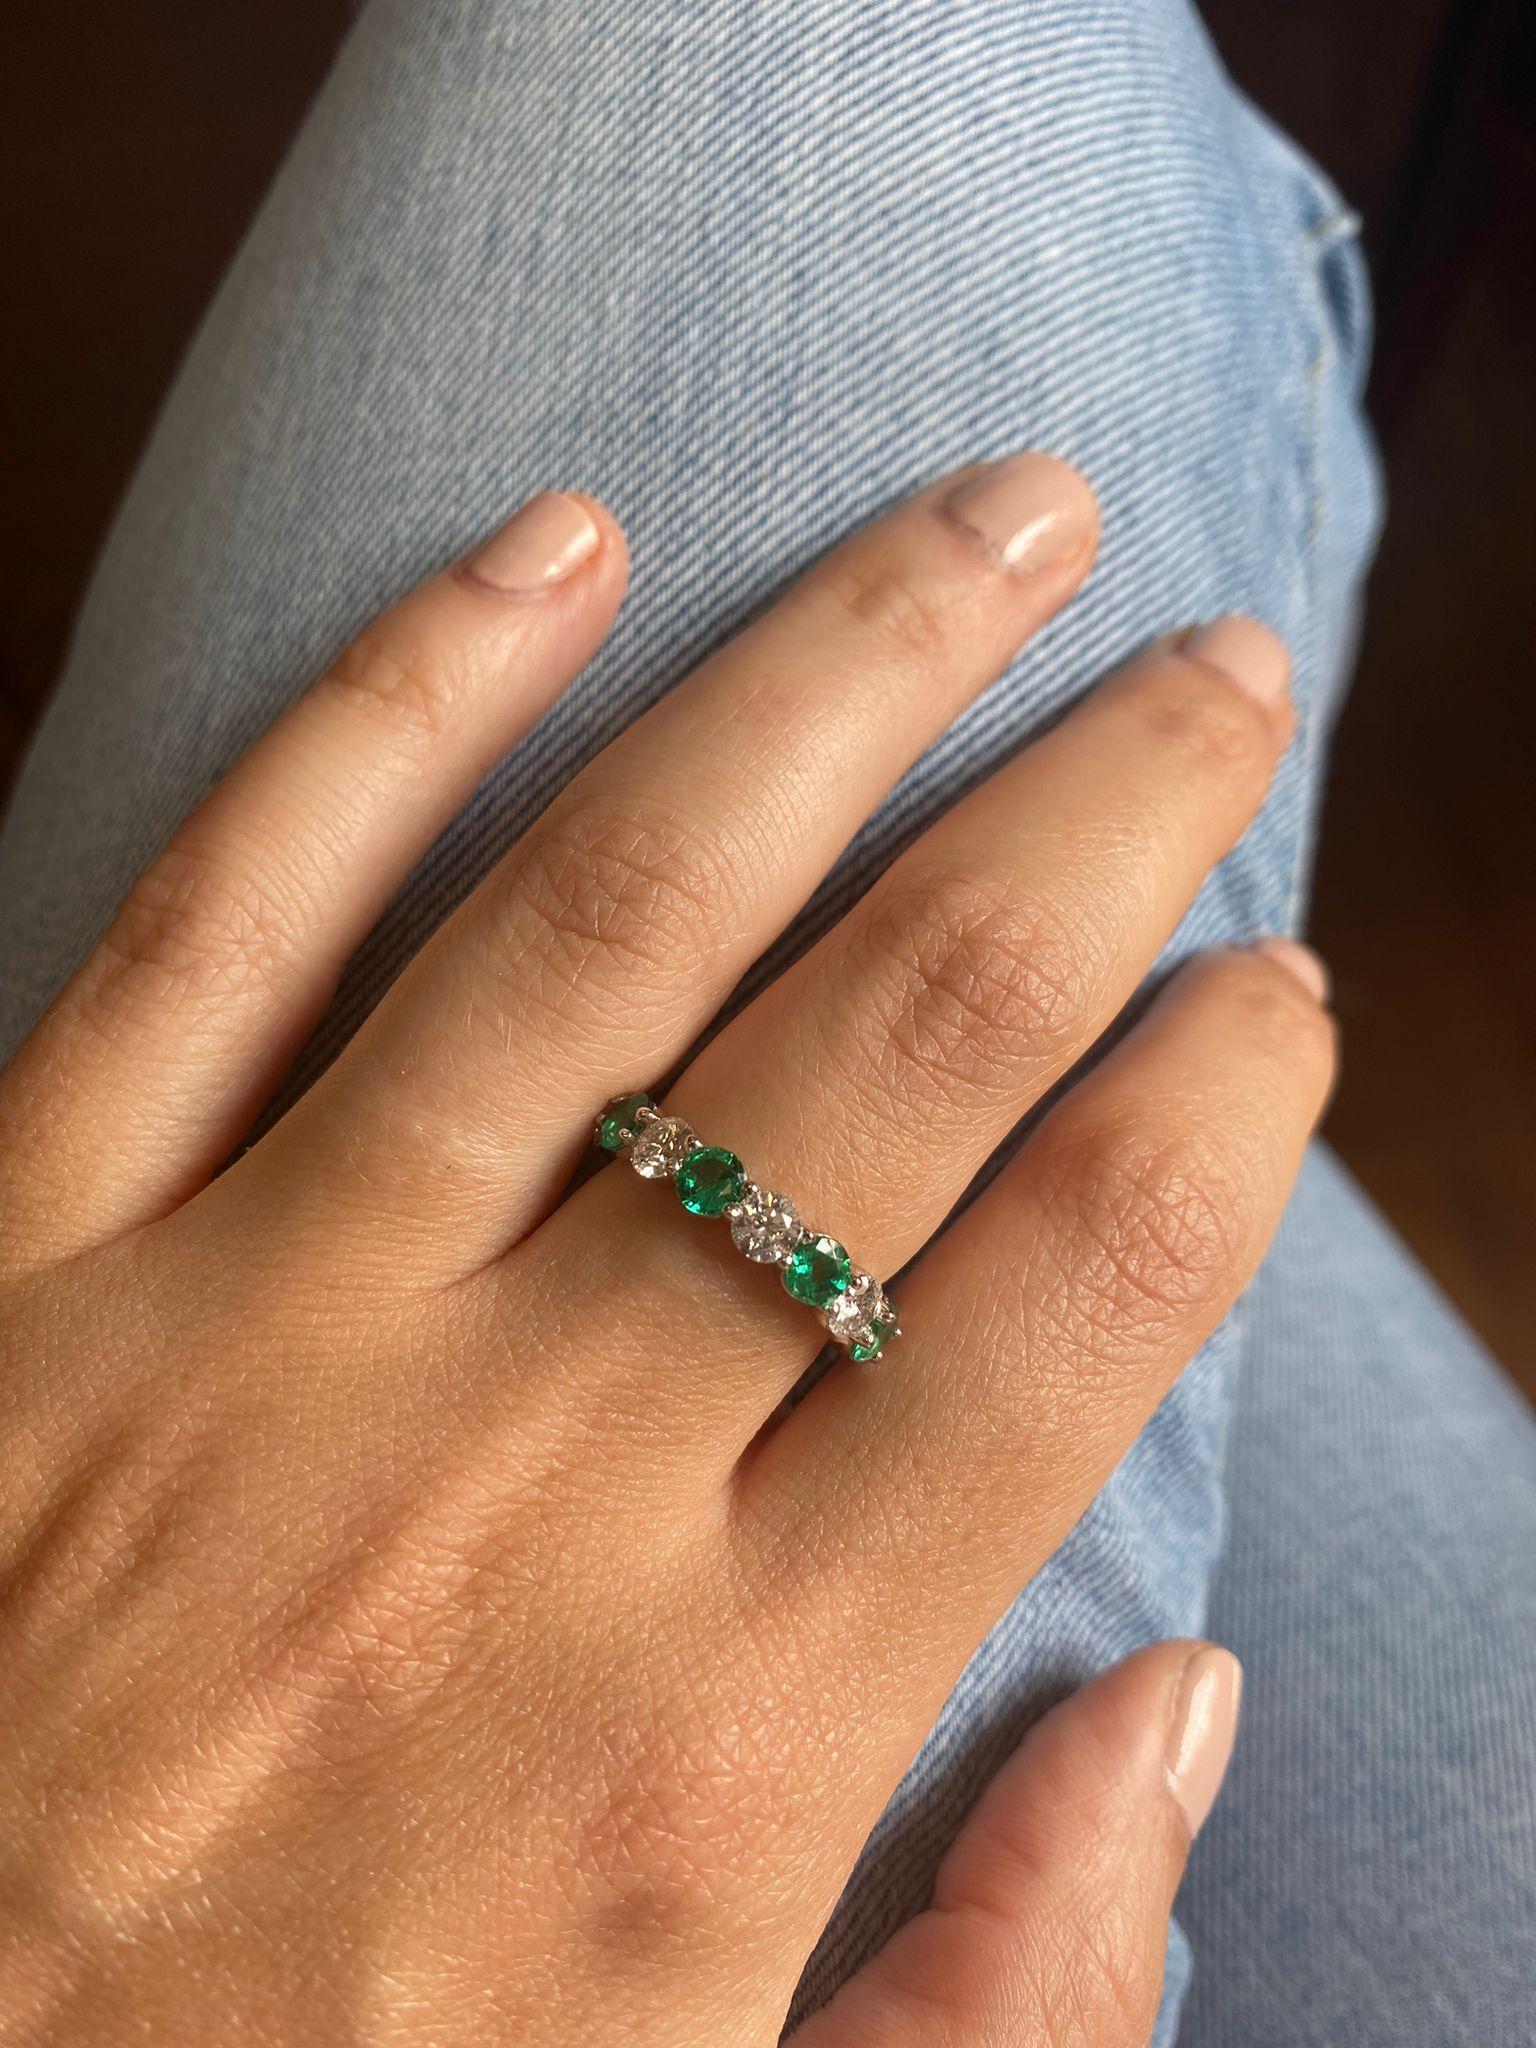 8 Emeralds weighing 1.65 Carats
8 Round Diamonds weighing 1.92 Carats.
Set in Platinum.
Size 6.

Also available in Blue Sapphires, ink Sapphires and Rubies. Can be ordered in any size.